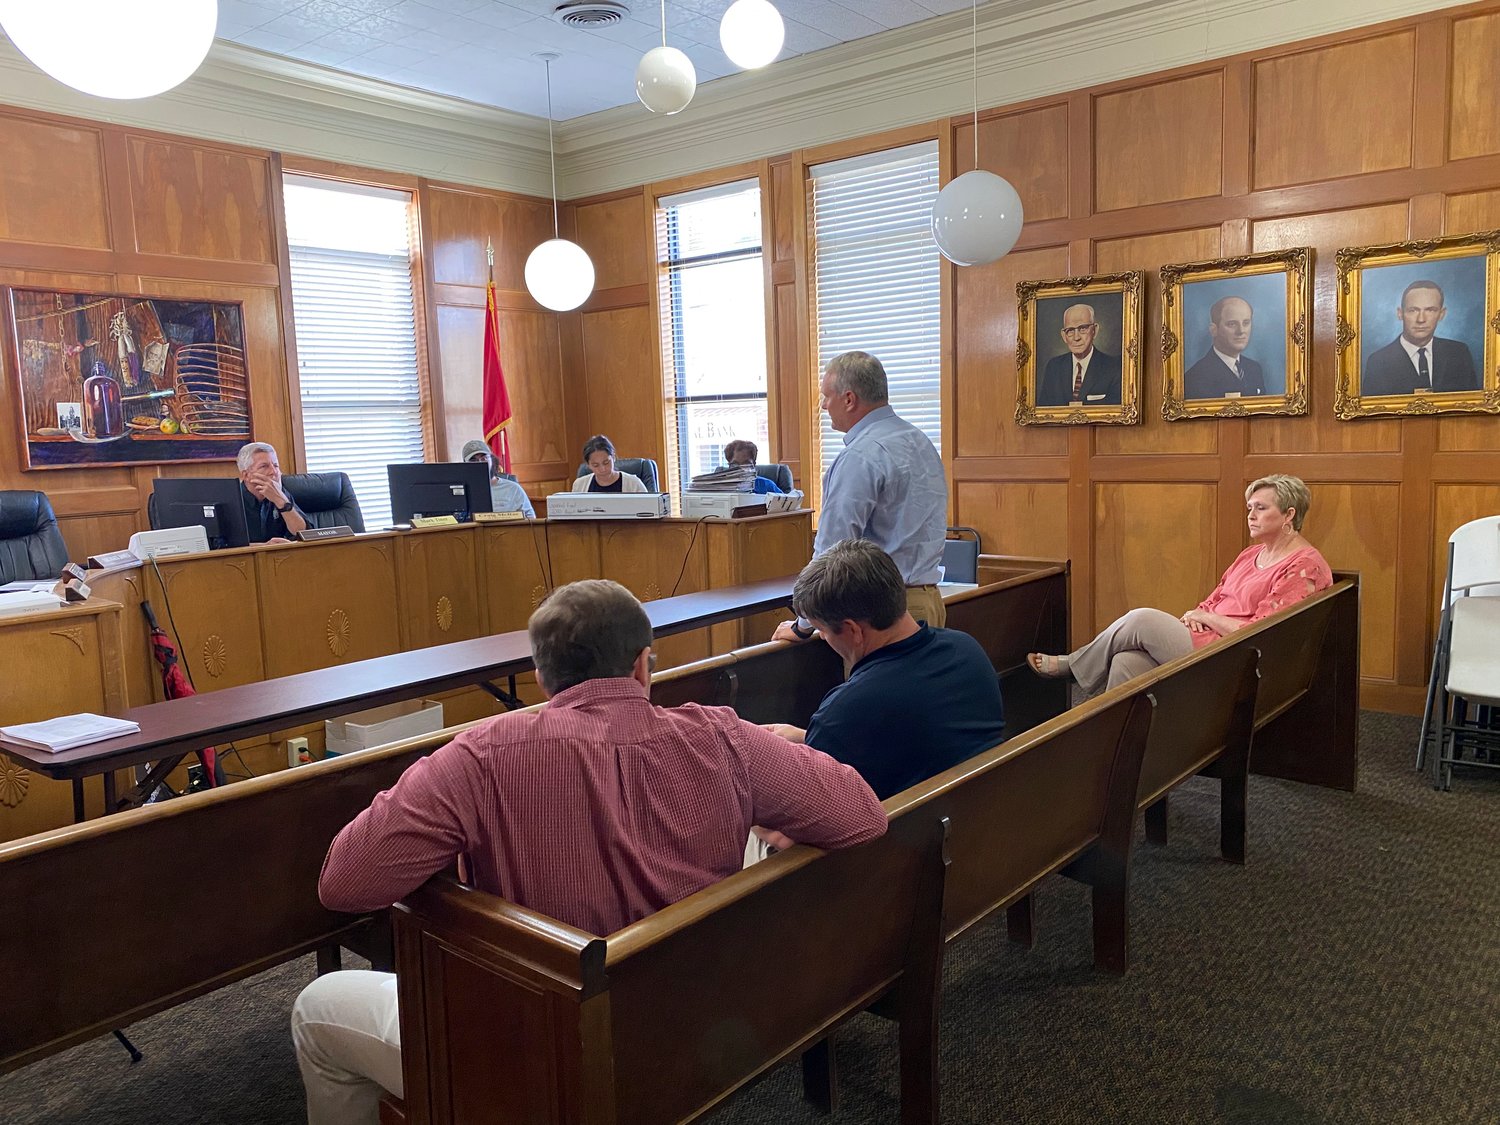 Planning Commission Chairman Dan Boice. (Left, seated) listened intently along with other members of the Commission as Byron Hicks (Center, standing) explained the 15 year plan for the City of Monticello.